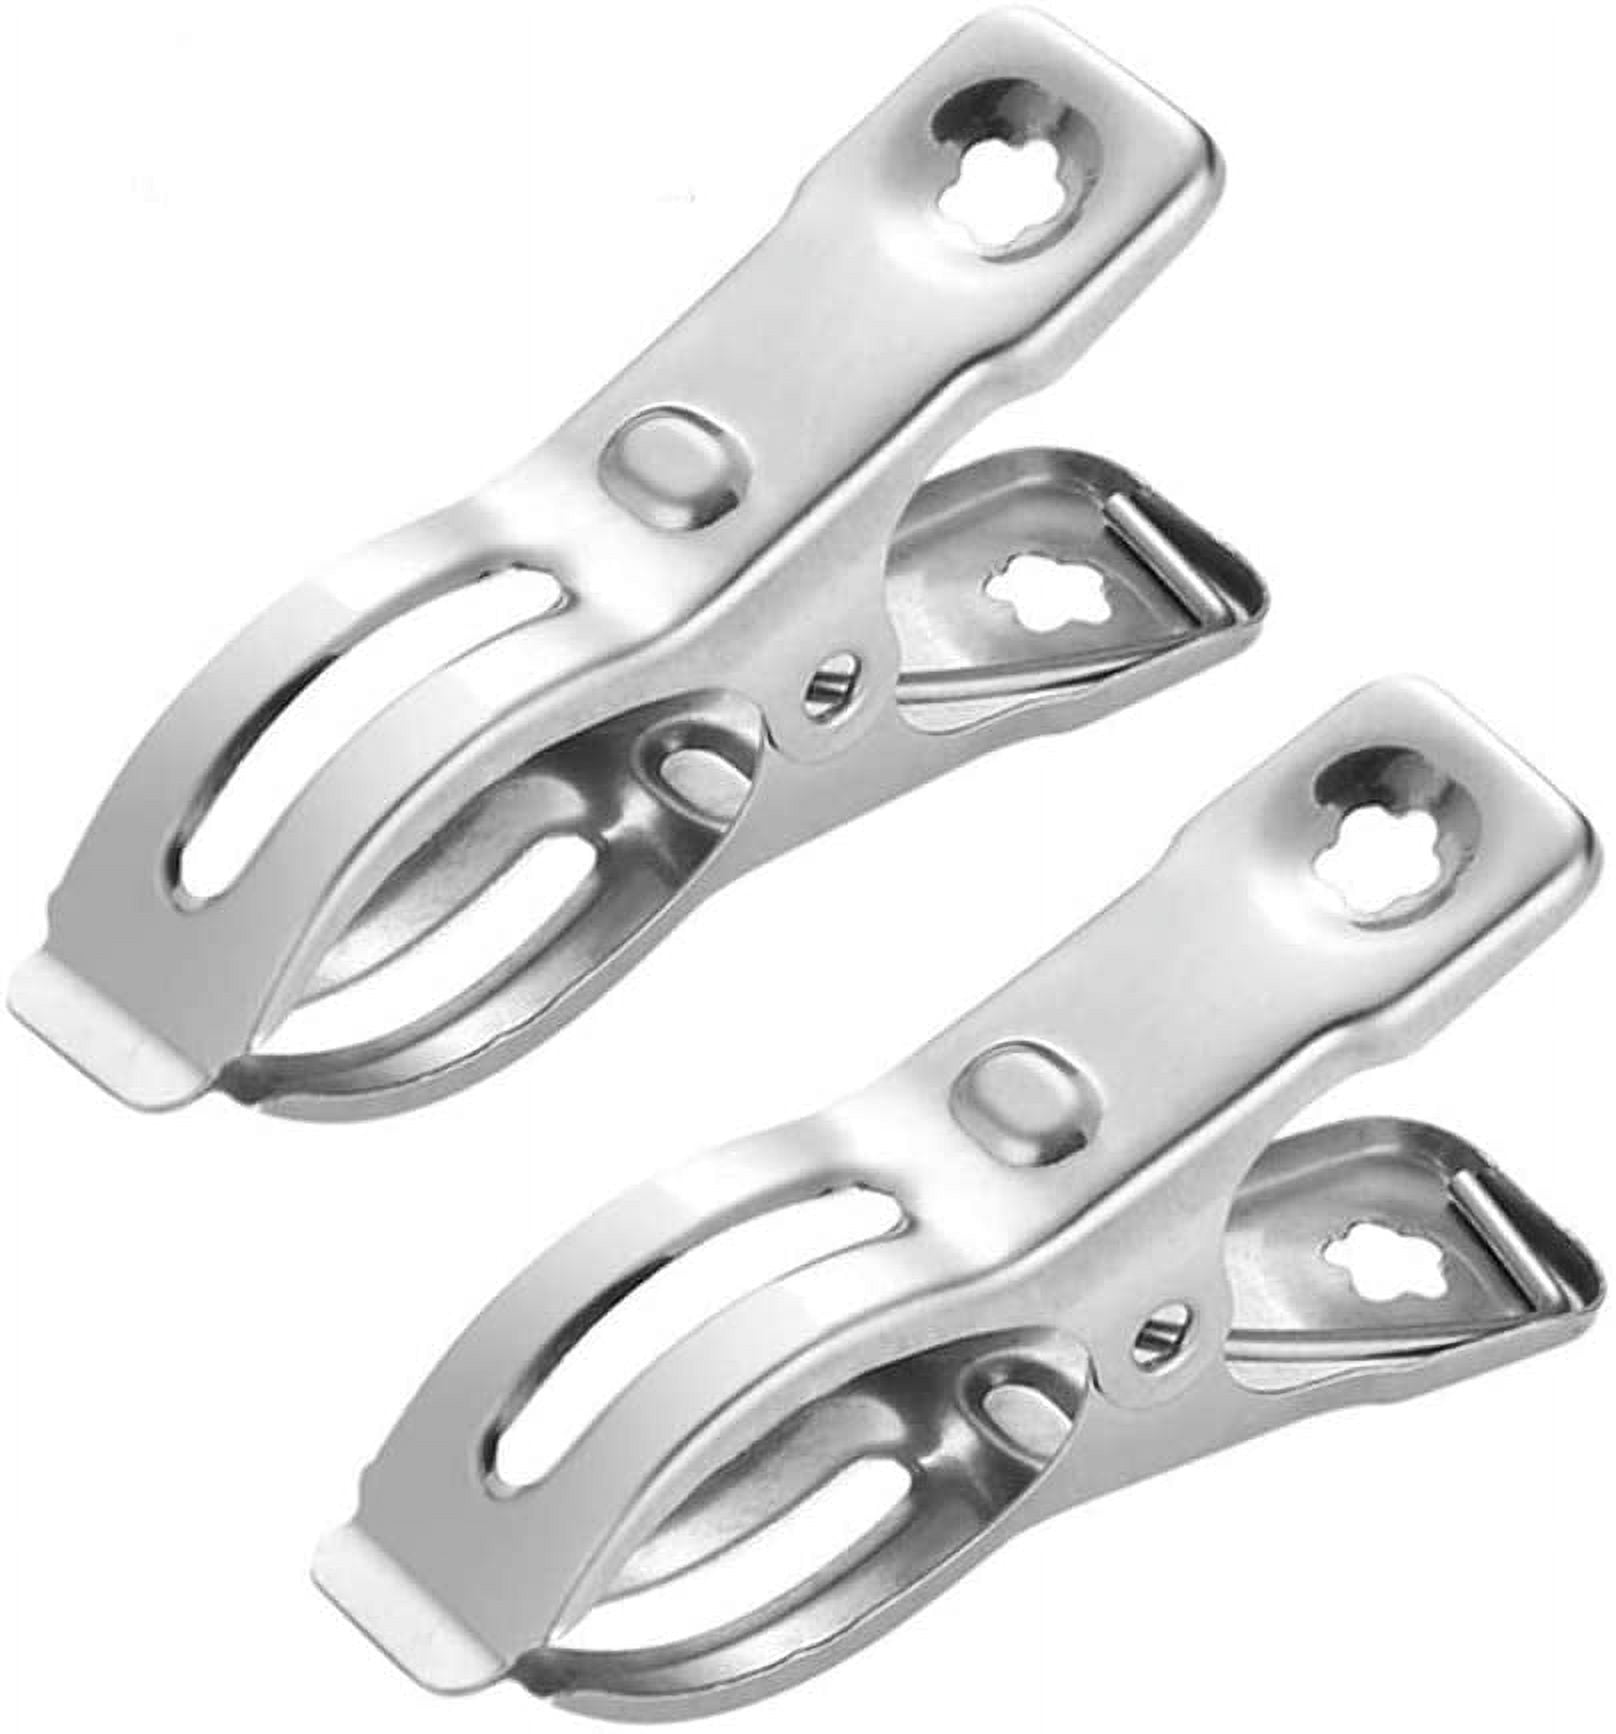 SNNROO 20 Pack Stainless Steel Clothes Pins, Utility Clips Hooks